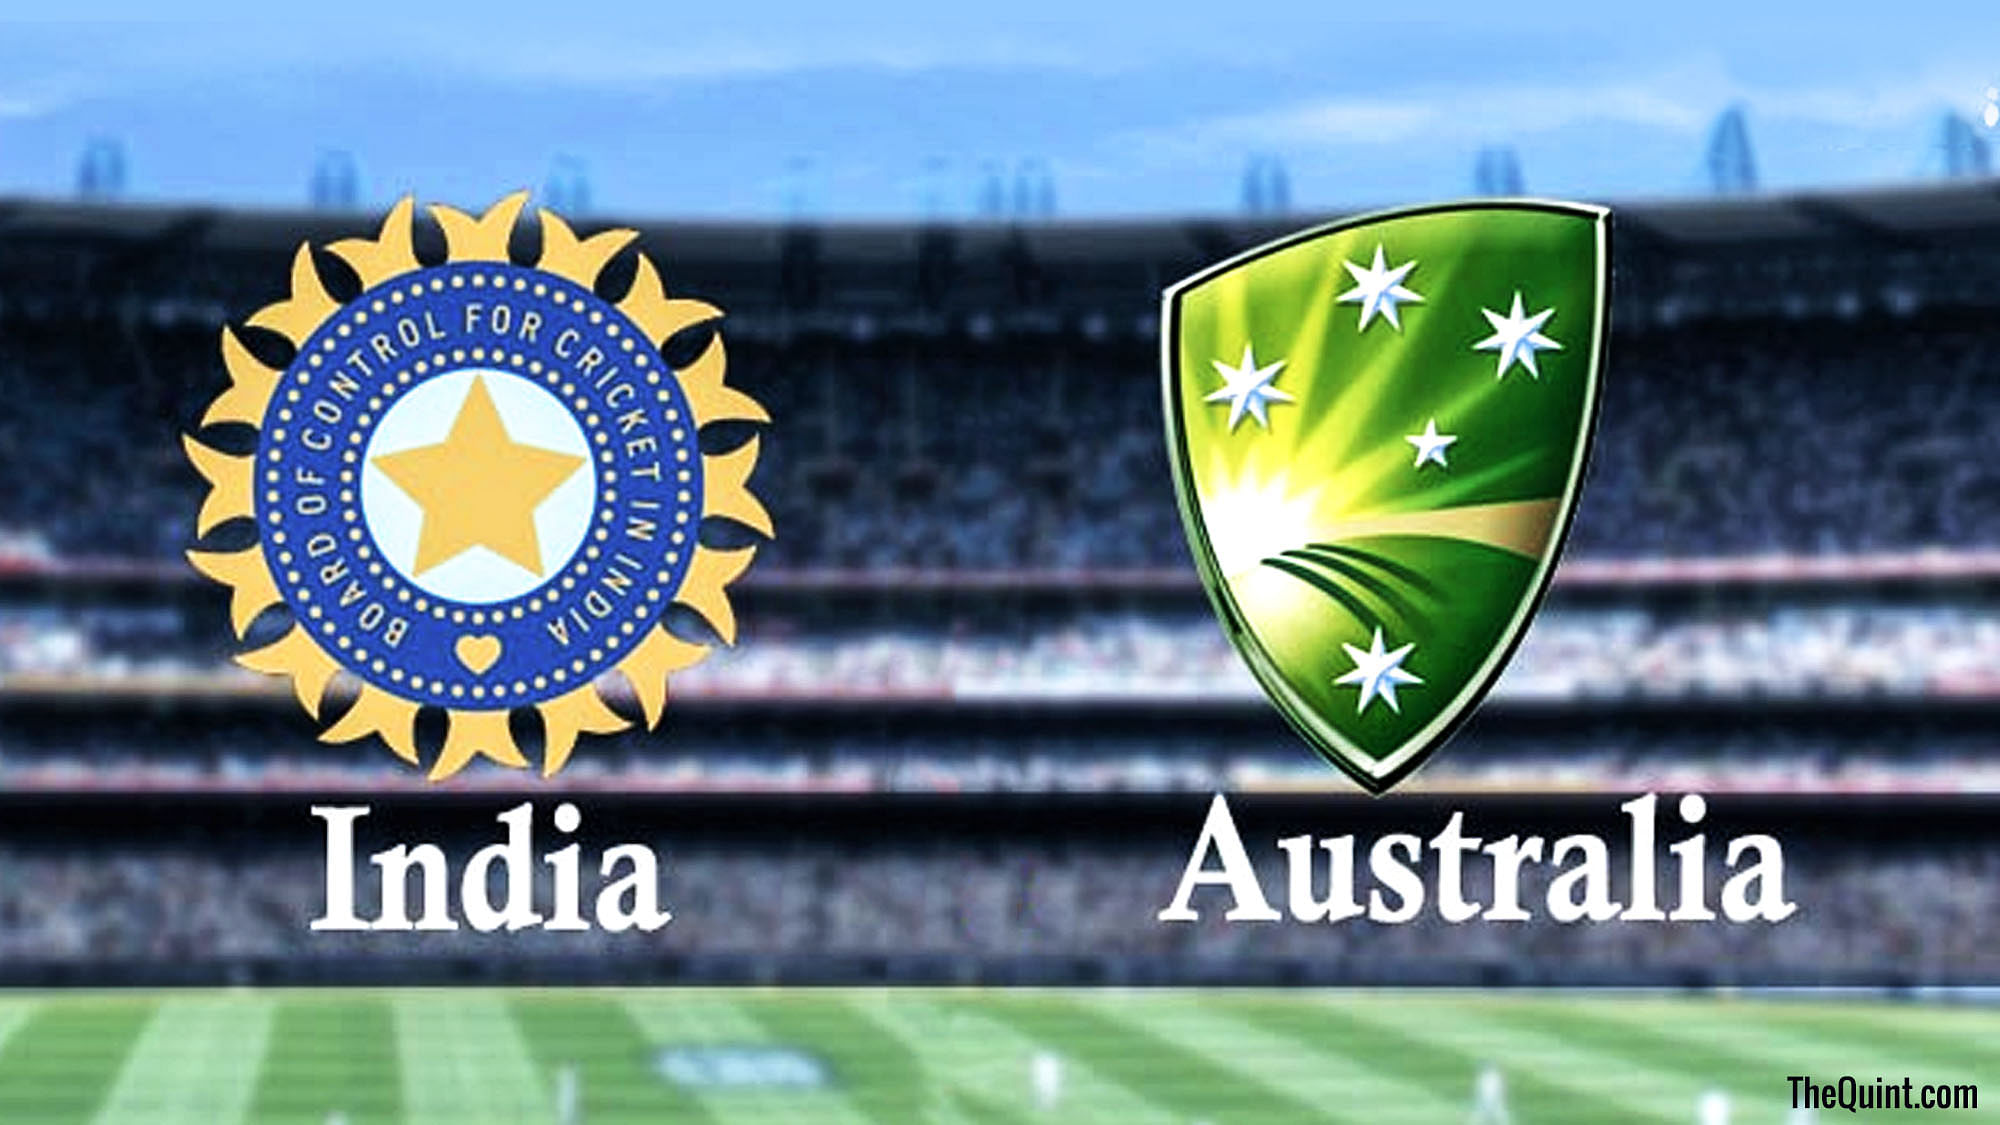 India vs Australia, 4th ODI, India vs Australia 1st ODI LIVE Cricket Score Streaming Online: First one day international cricket match against Australia will be played in Hyderabad on 2 March 2019.&nbsp;